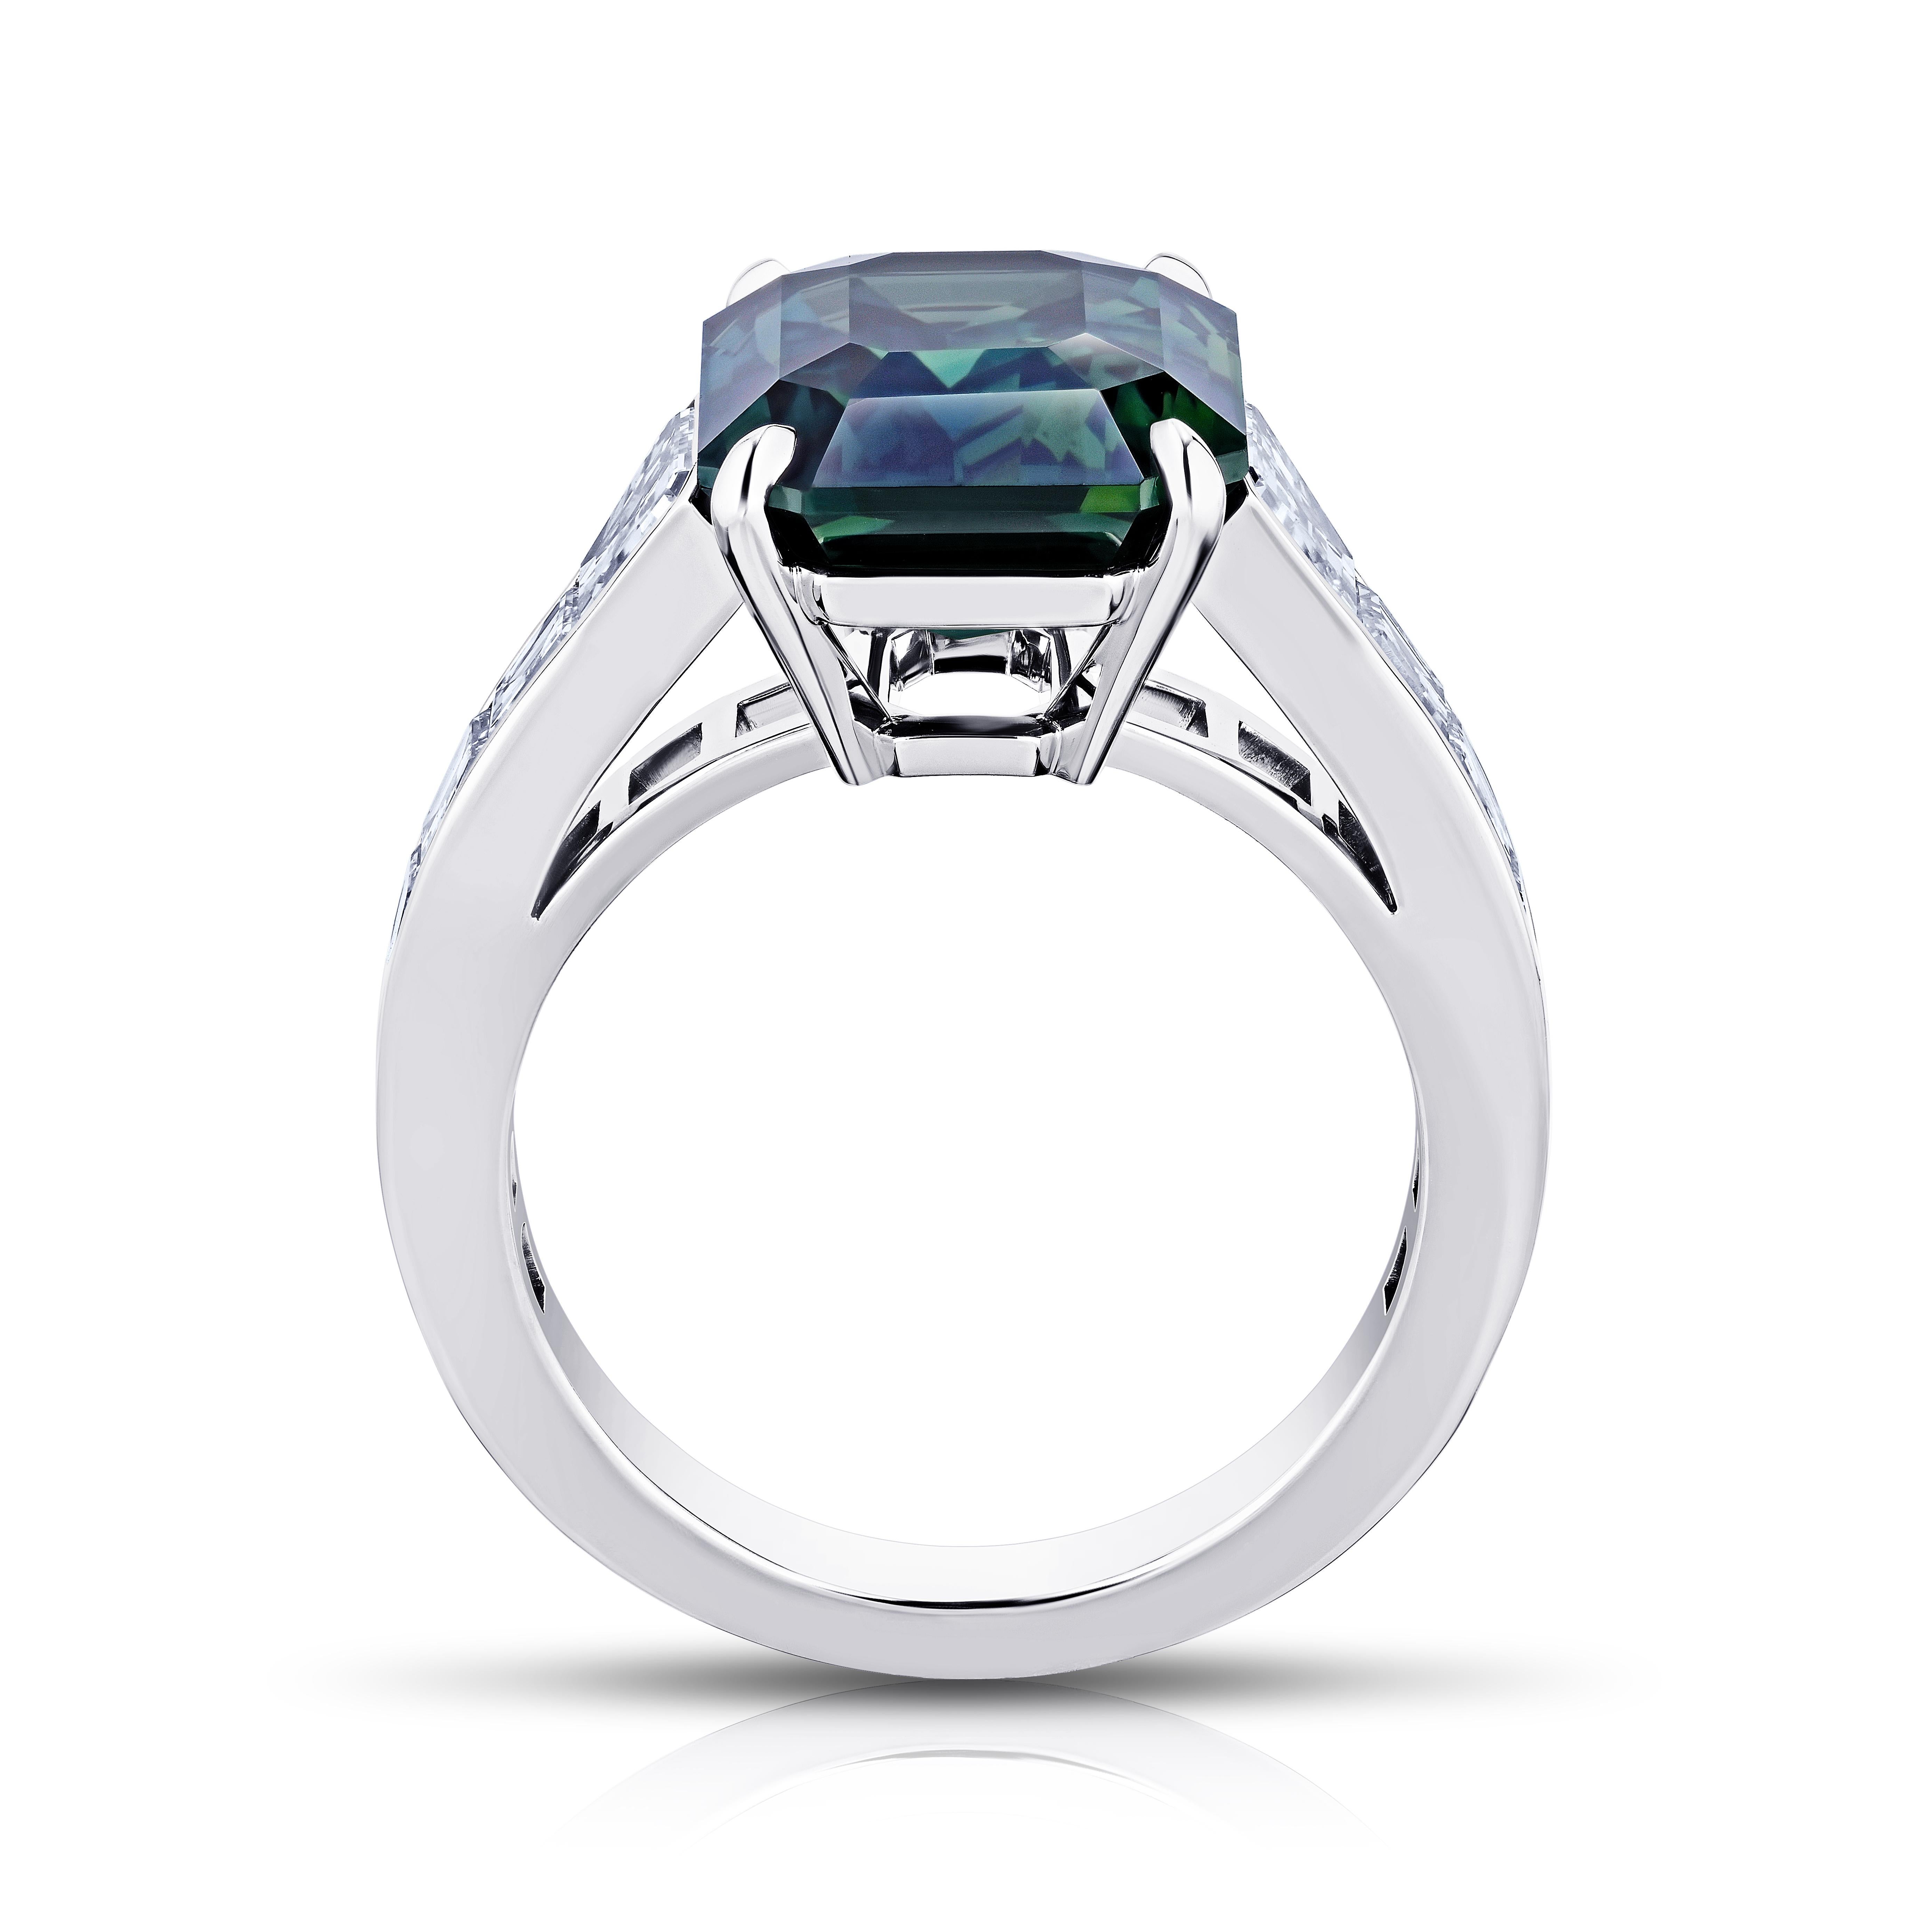 Contemporary 8.61 Carat Emerald Cut Green Sapphire and Diamond Platinum Ring For Sale